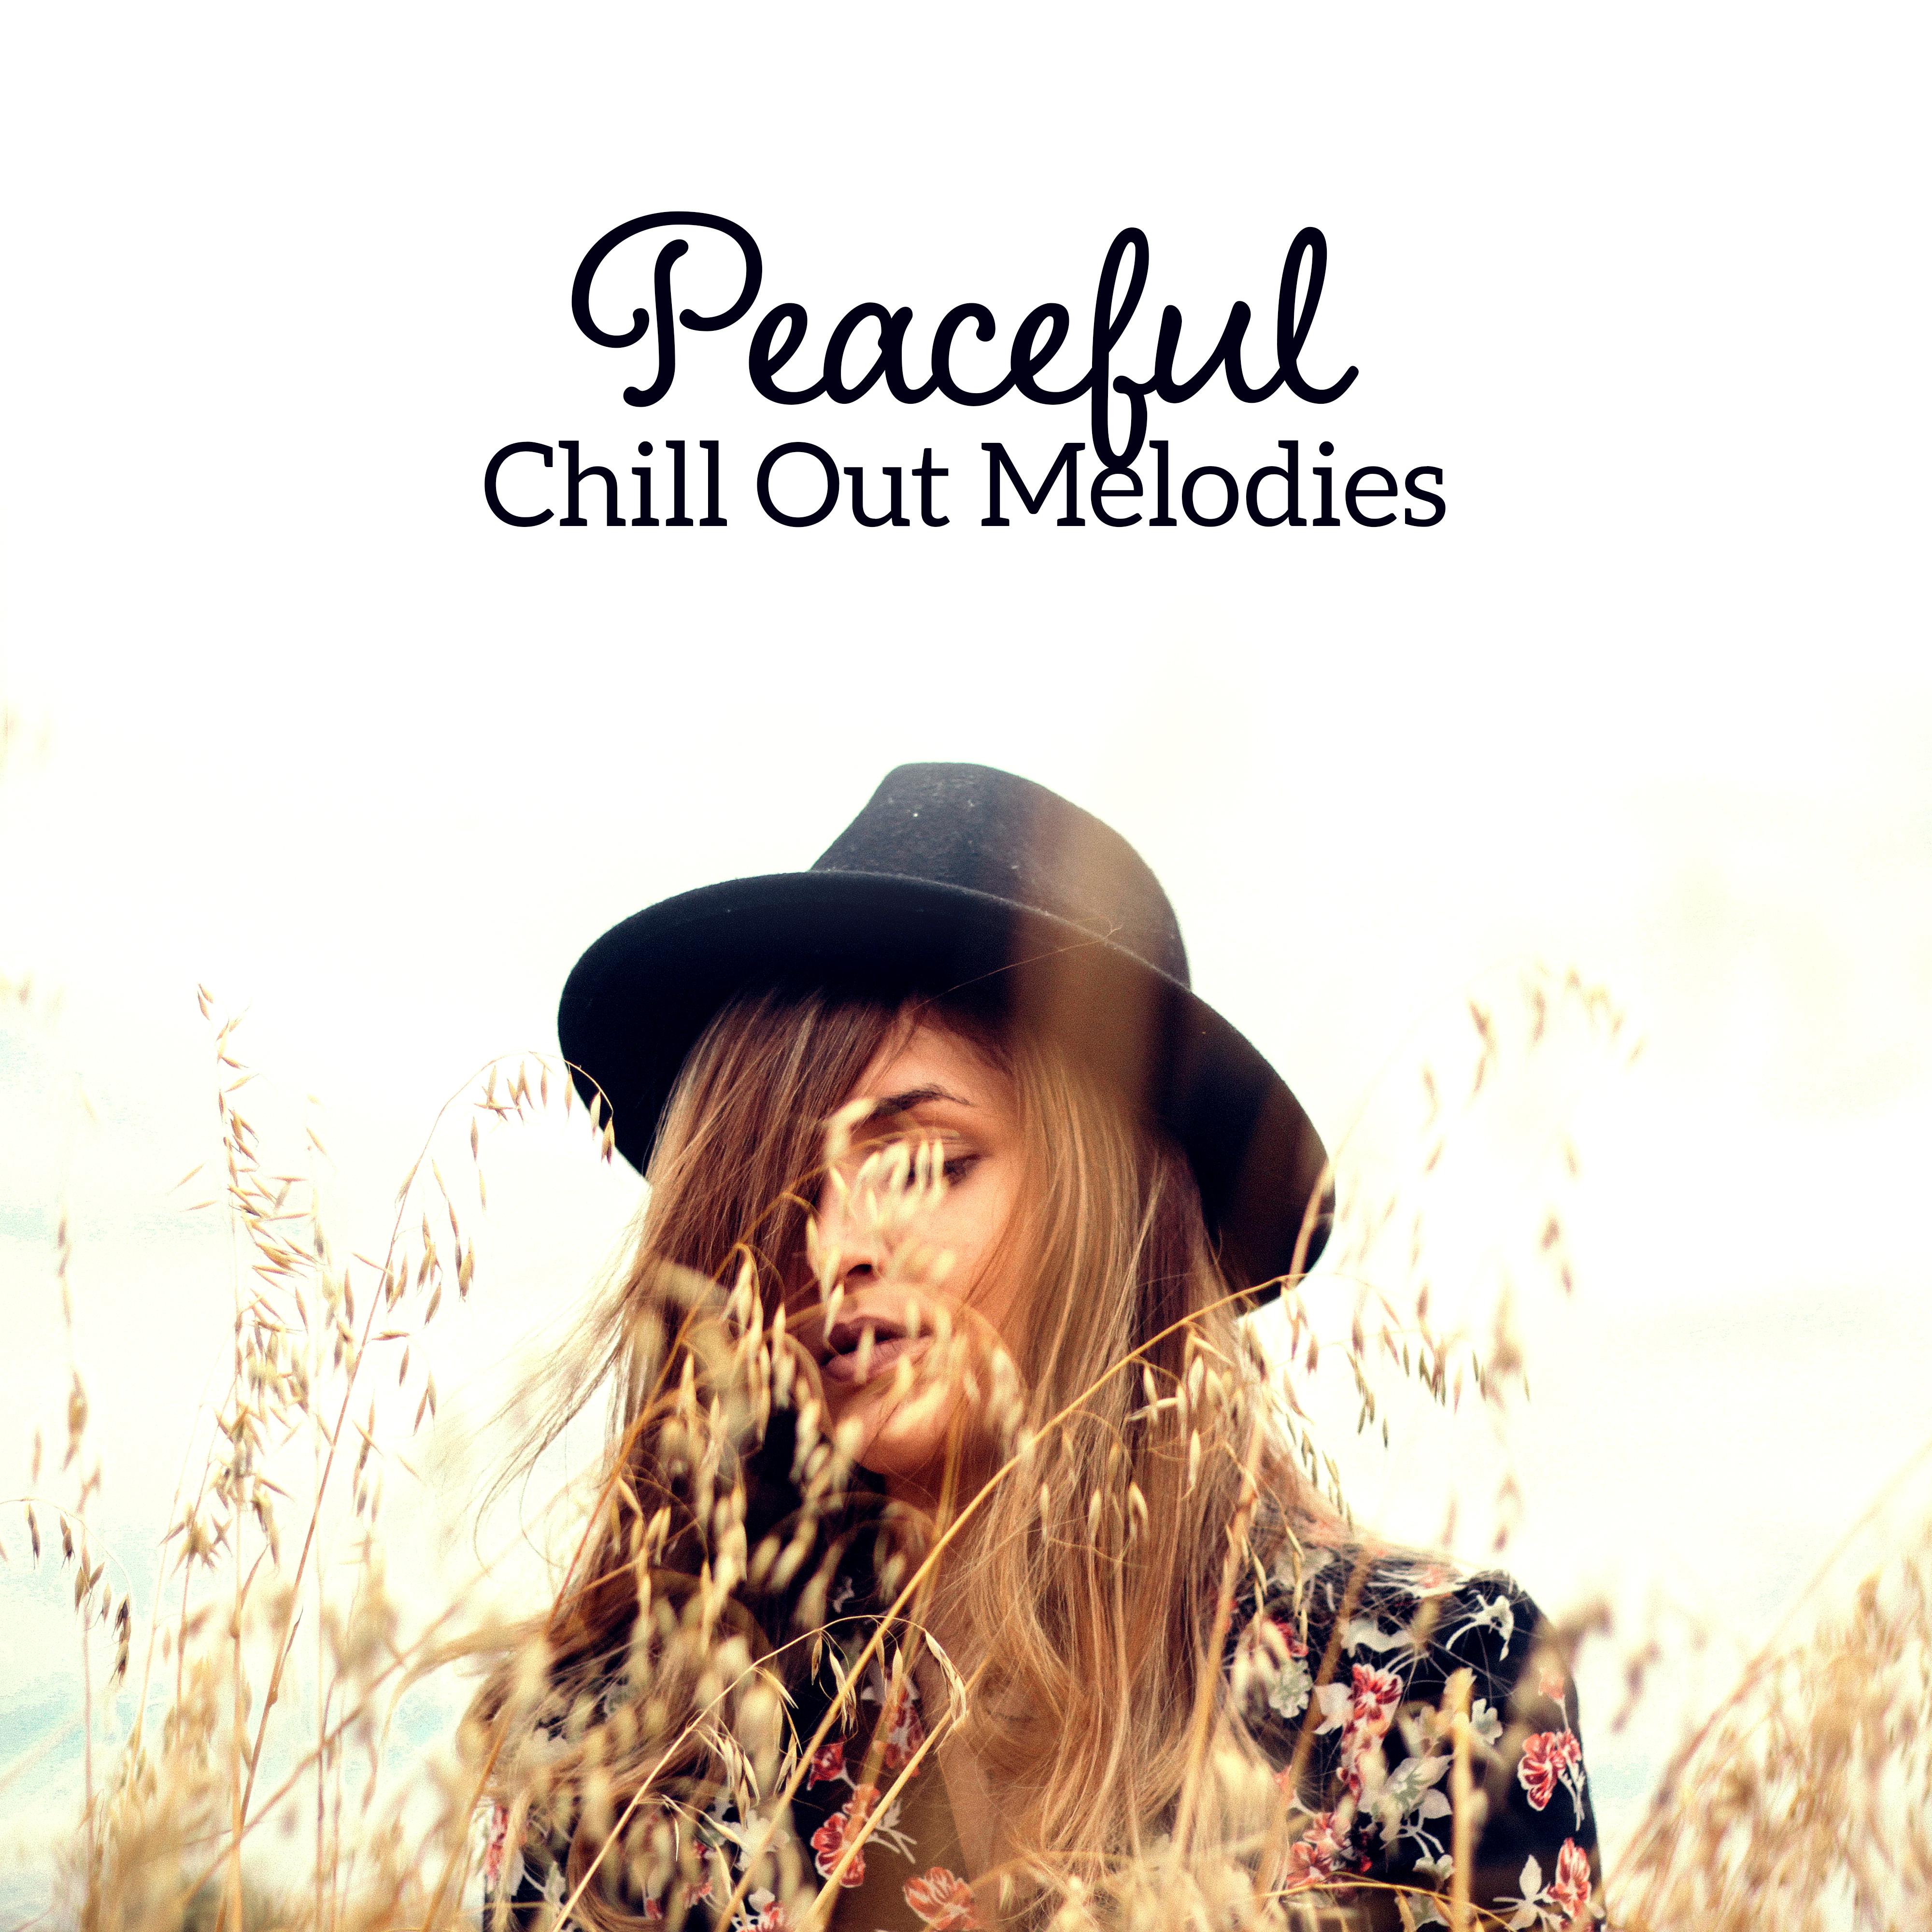 Peaceful Chill Out Melodies – Summer Rest, Beach Relaxation, Stress Relief, Inner Peace, Calm Sounds